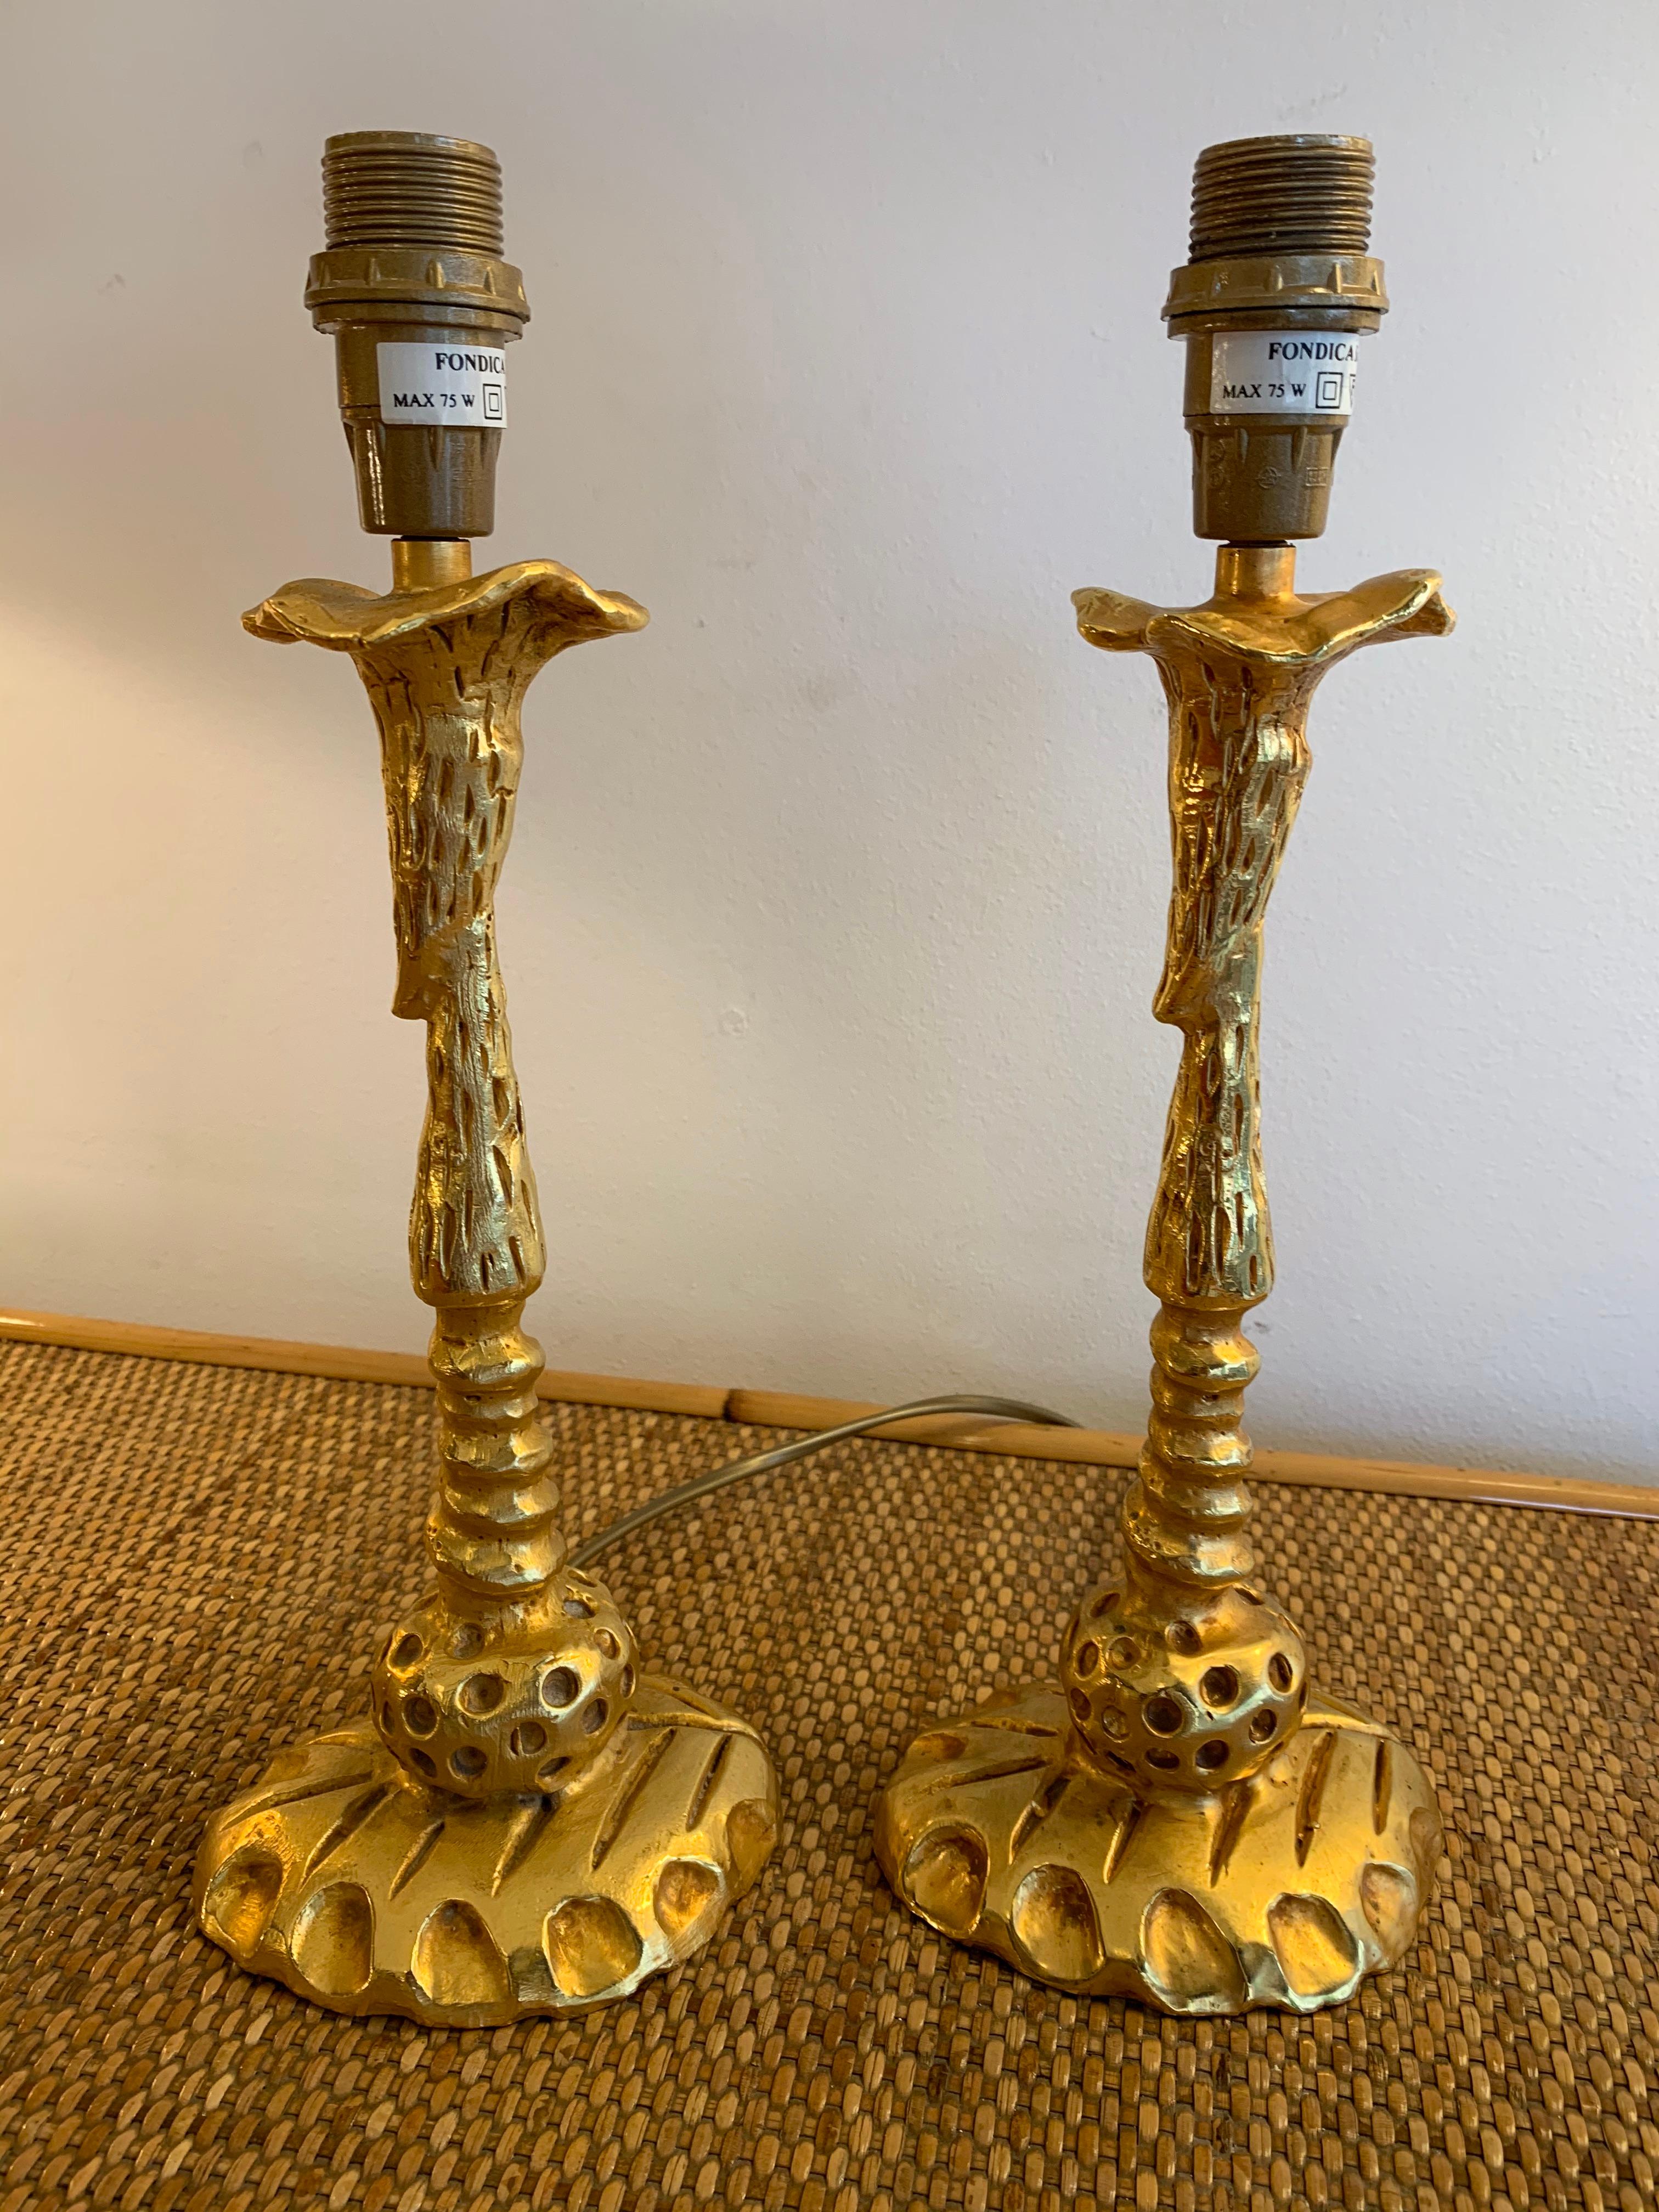 Pair of lamps gilt metal bronze style by Mathias for Fondica. Sign Mathias. Famous artist who have worked for the manufacture like Nicolas Dewael, Stéphane Galerneau, Pierre Casenove. In the style of Garouste et Bonetti, Giacometti, Maison Jansen,